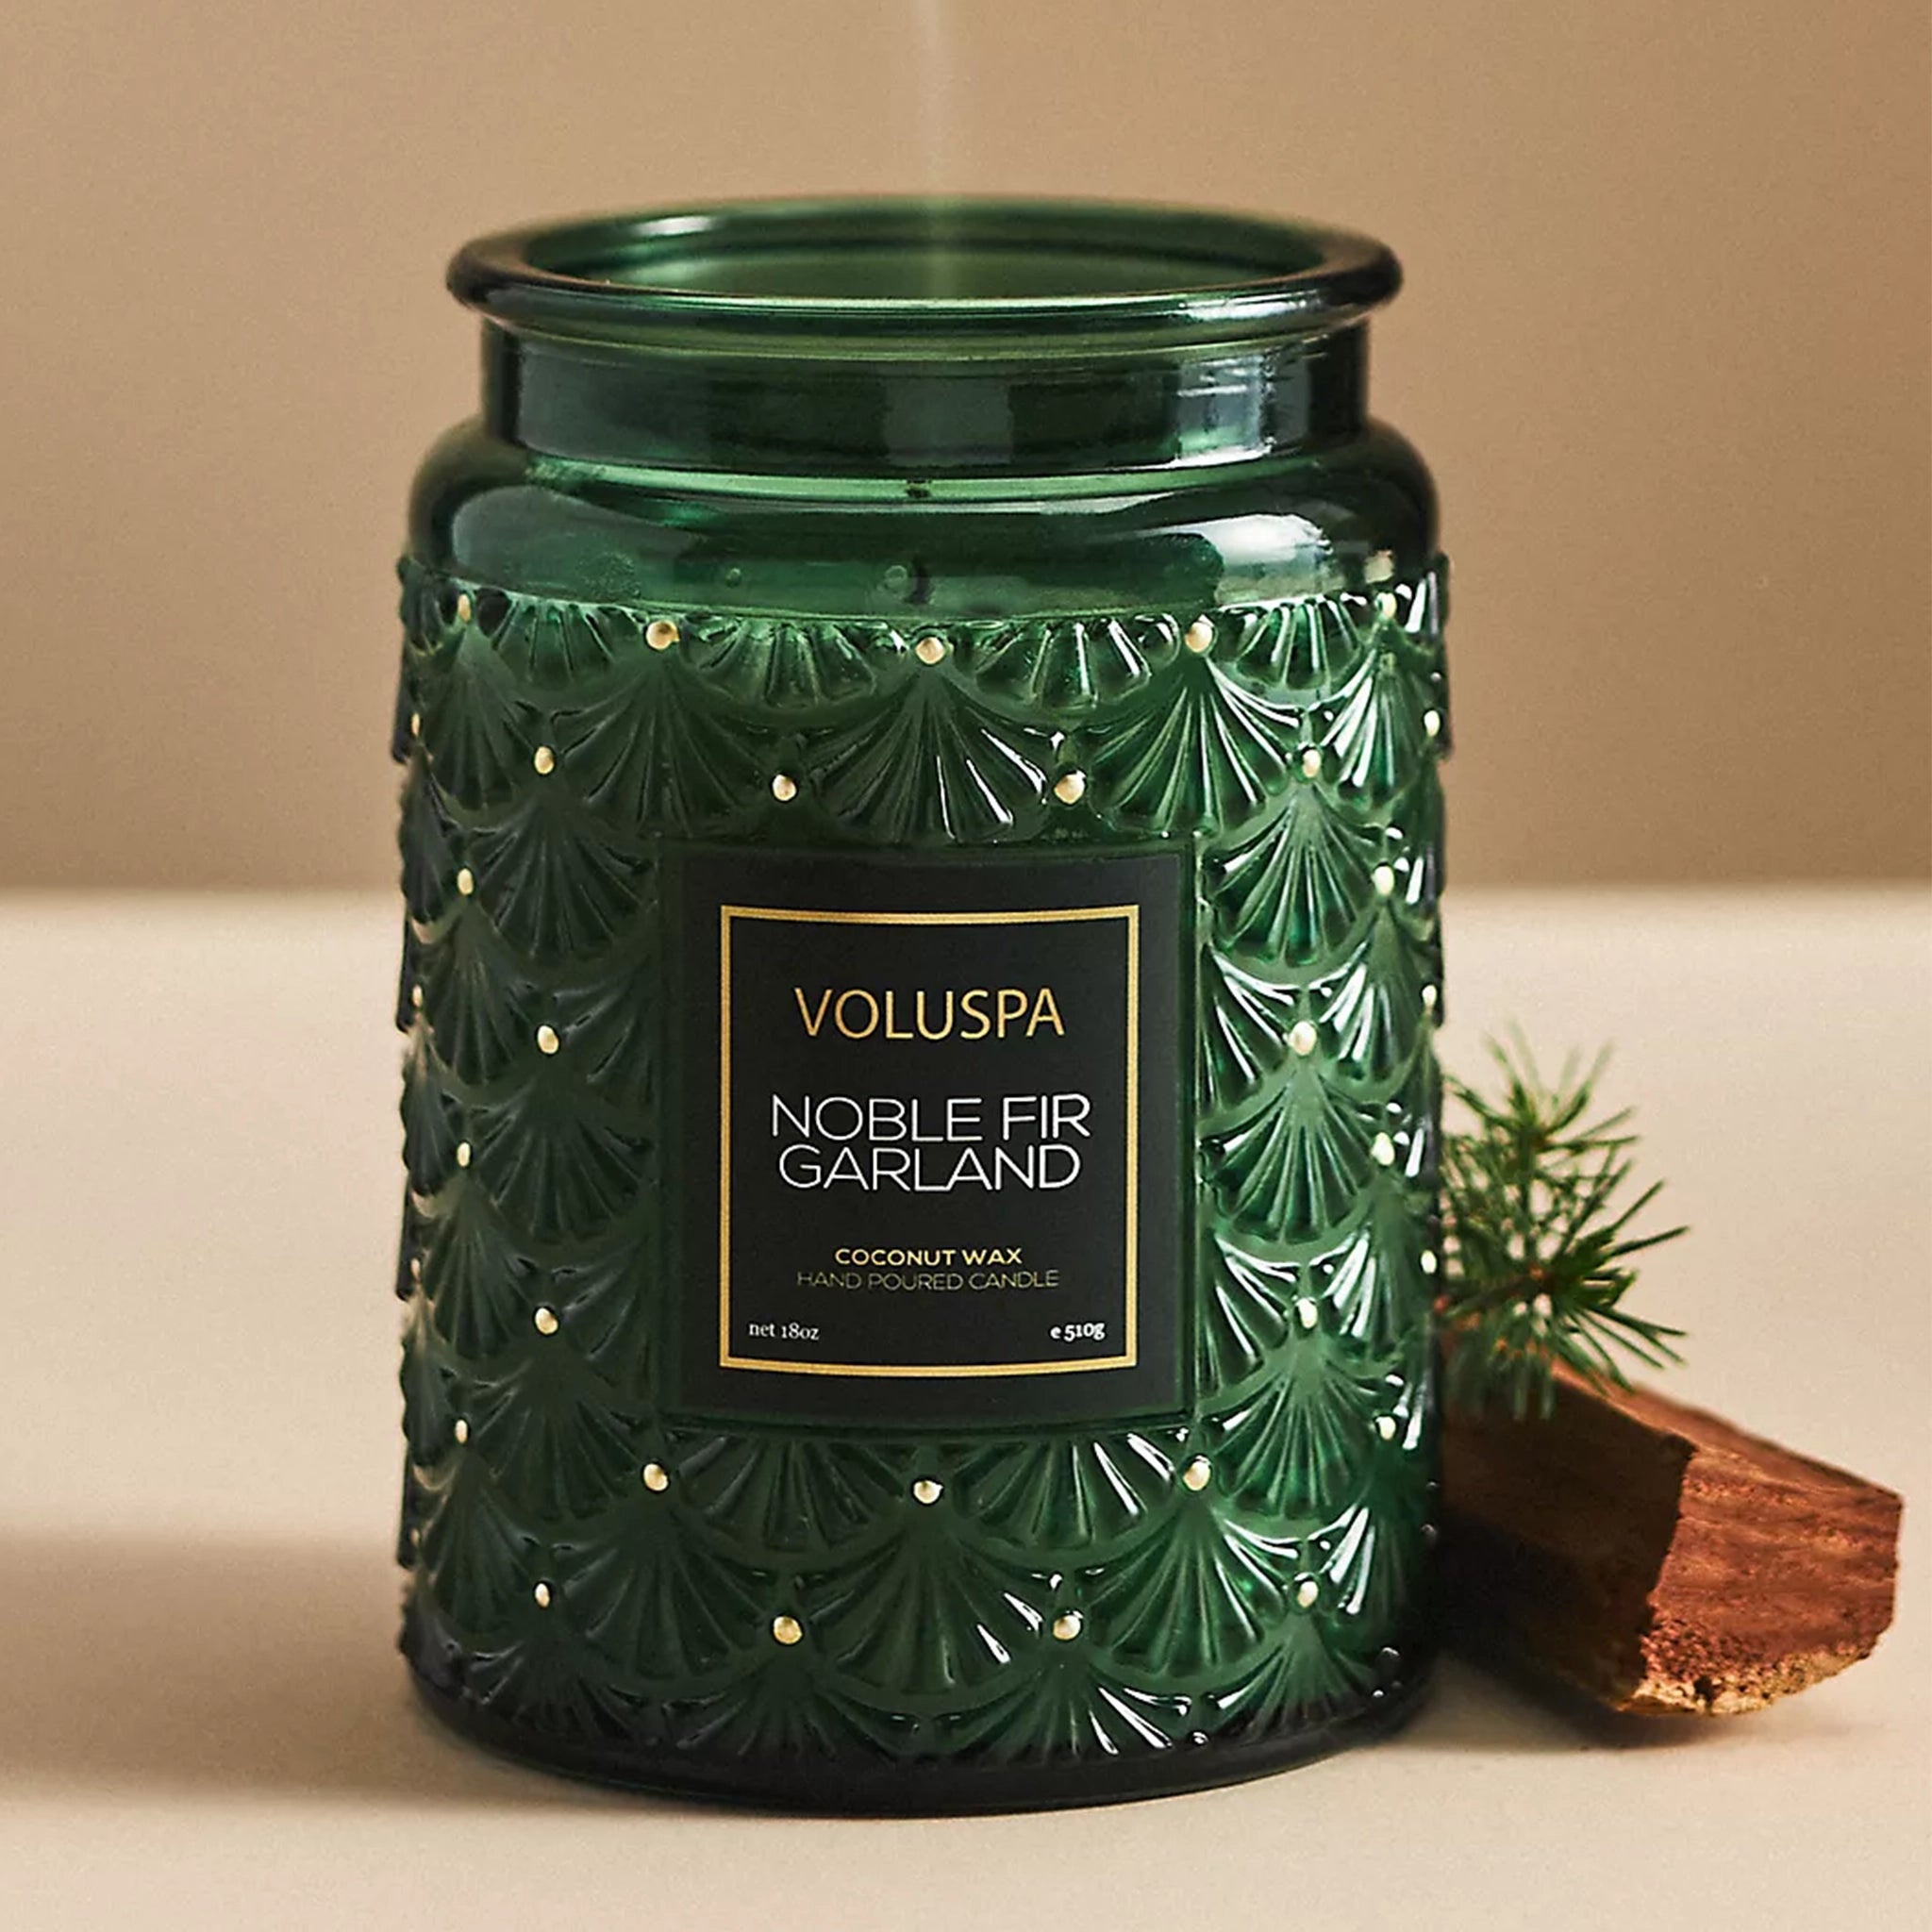 On a tan background is a dark green decorative glass jar candle with gold dot details and a label in the center that reads, "Noble Fir Garland".